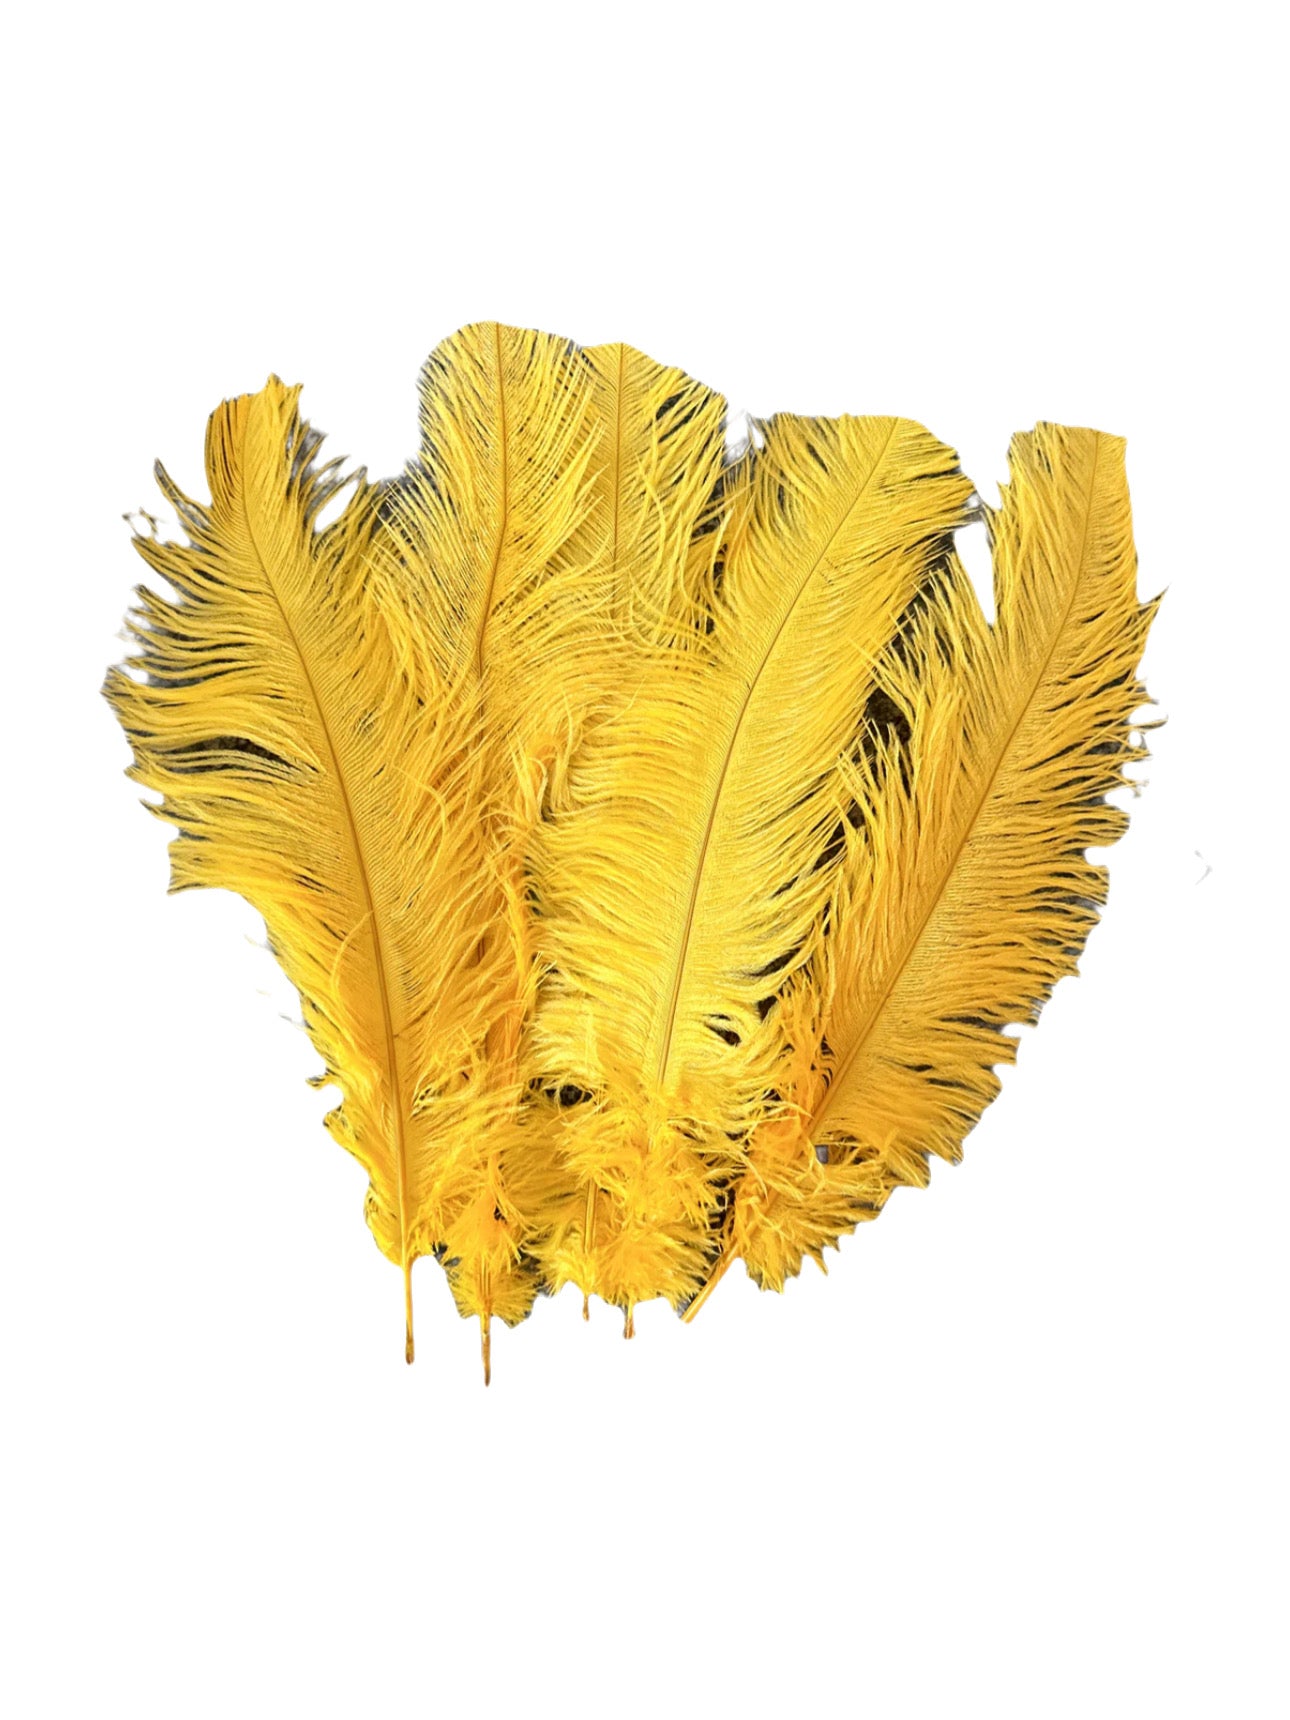 BULK 1/2lb Ostrich Feather Tail Plumes 15-20" (Golden Yellow) - Buy Ostrich Feathers